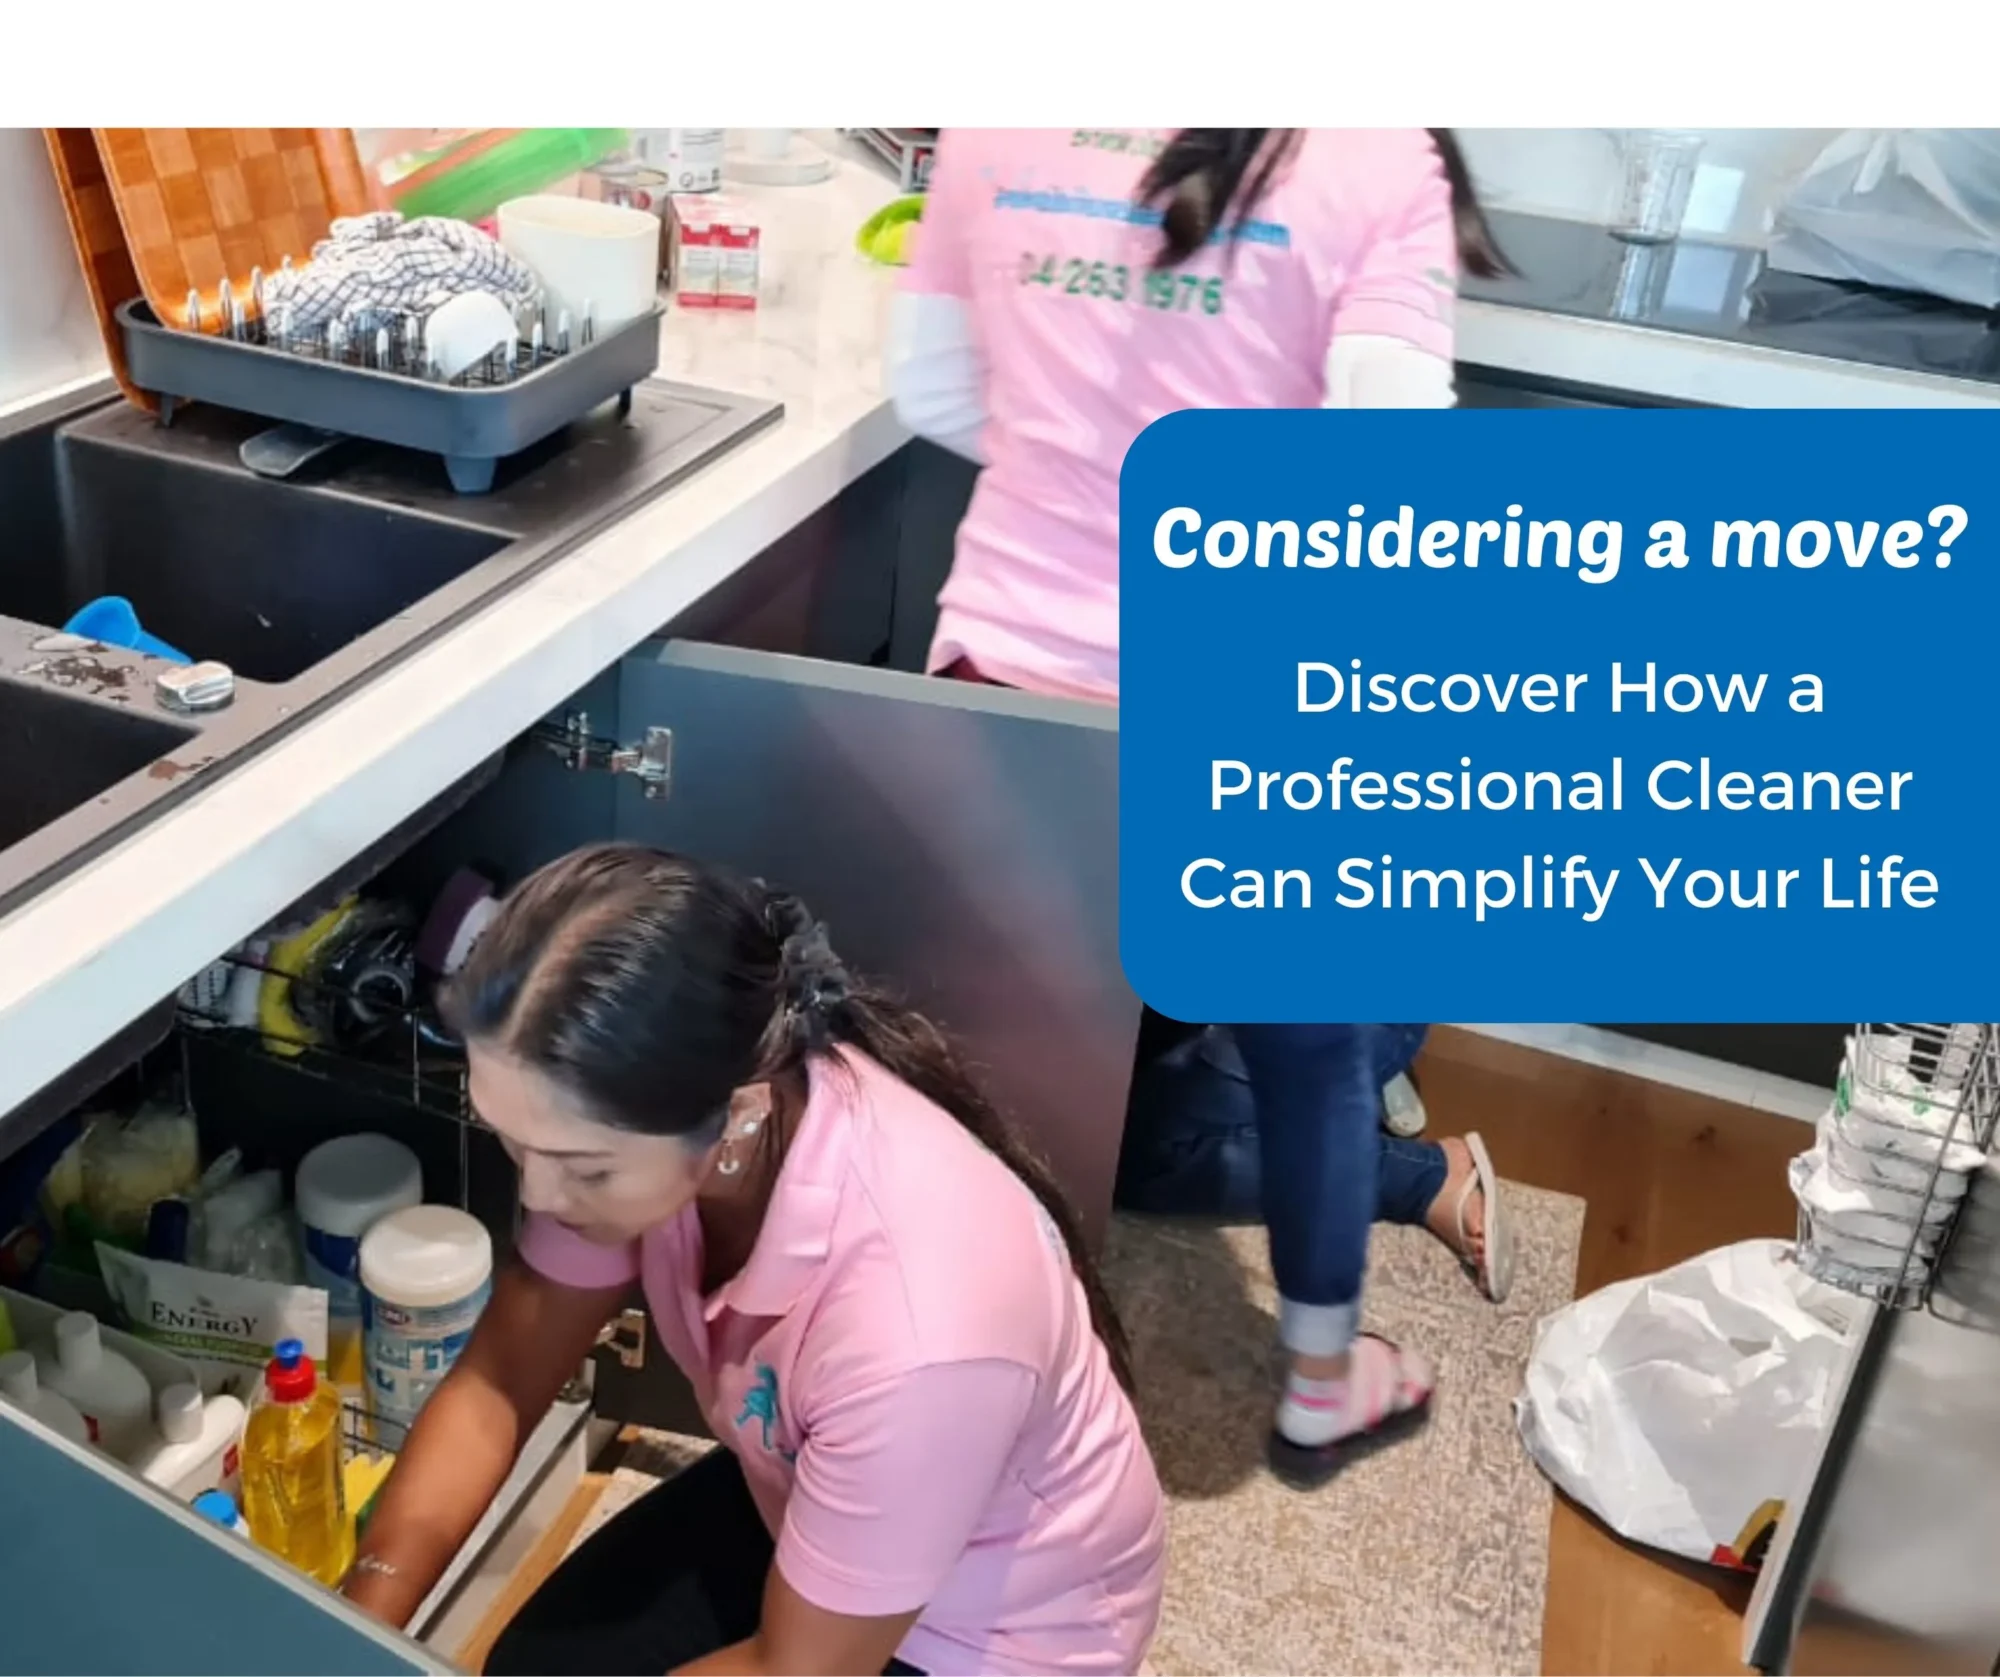 Considering a Move? Discover How a Professional Cleaner Can Simplify Your Life